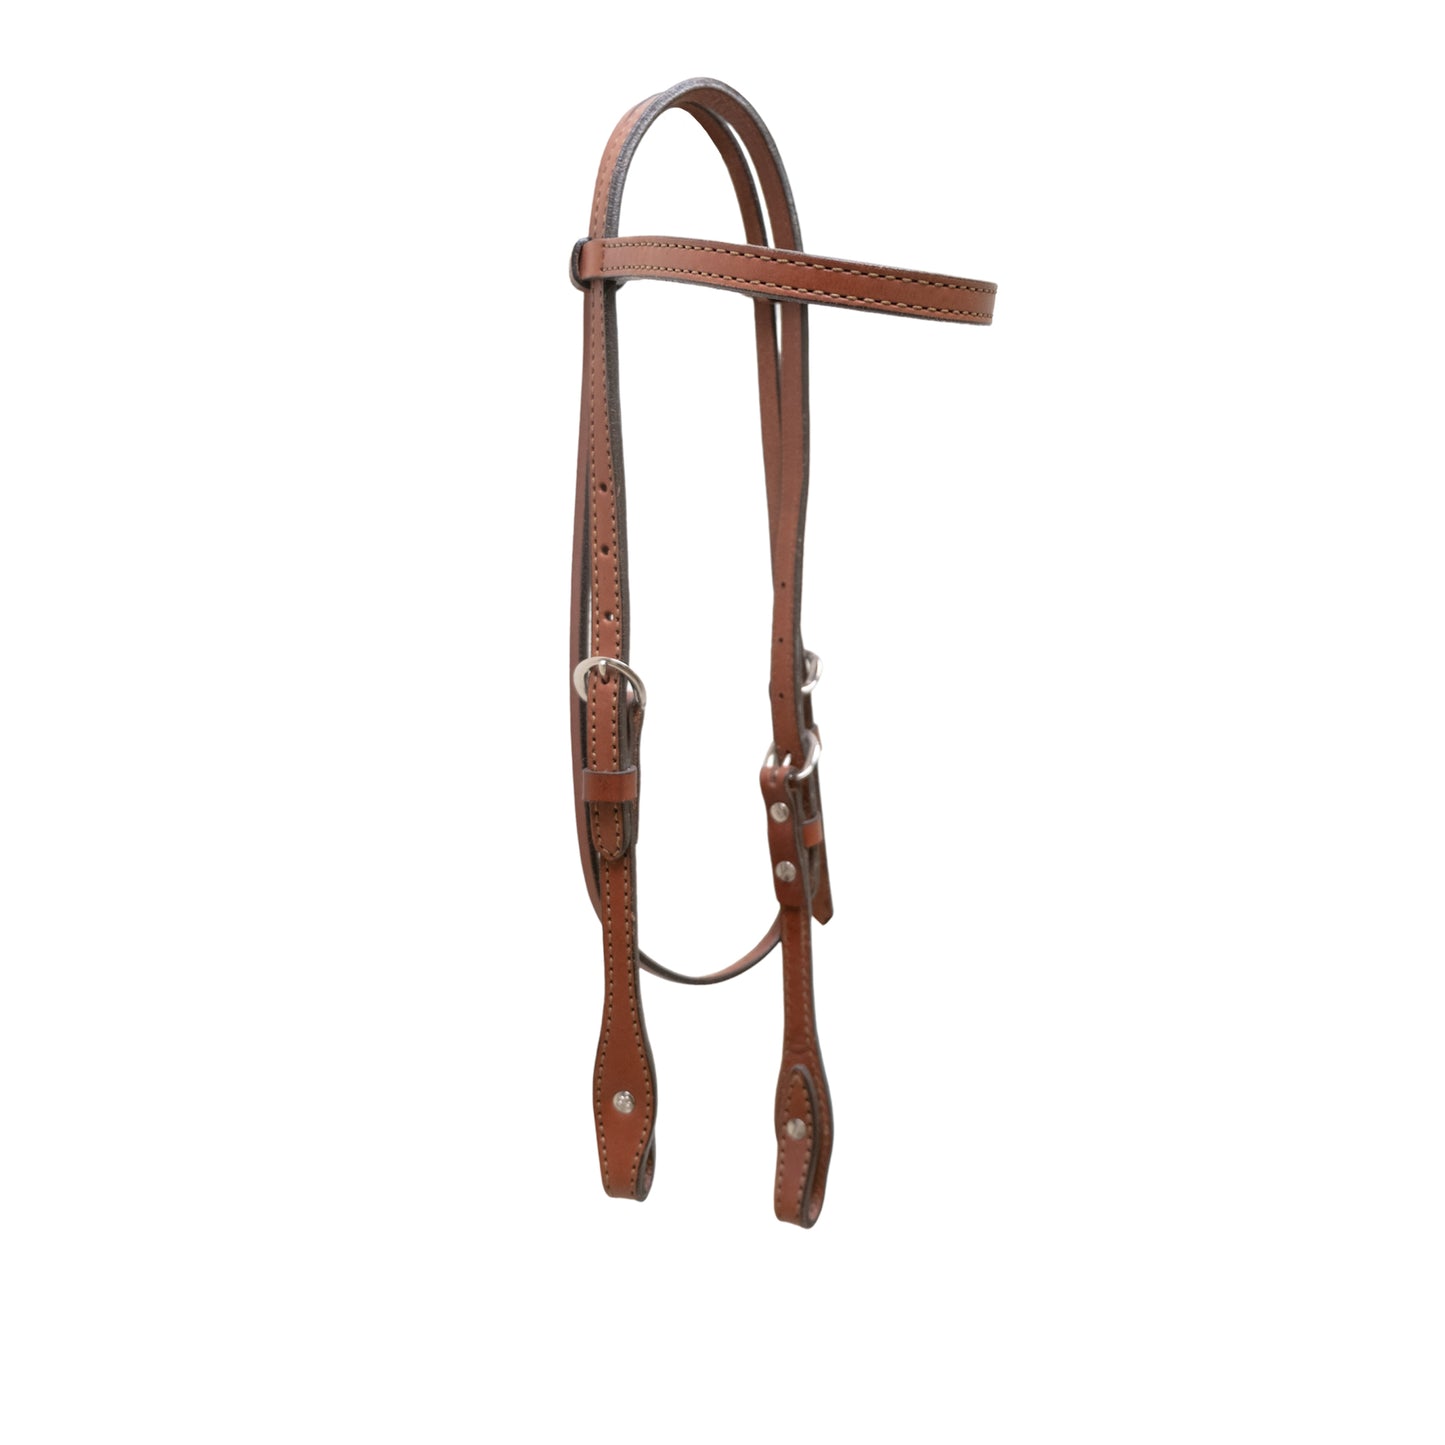 1/2" Straight browband headstall toast leather.